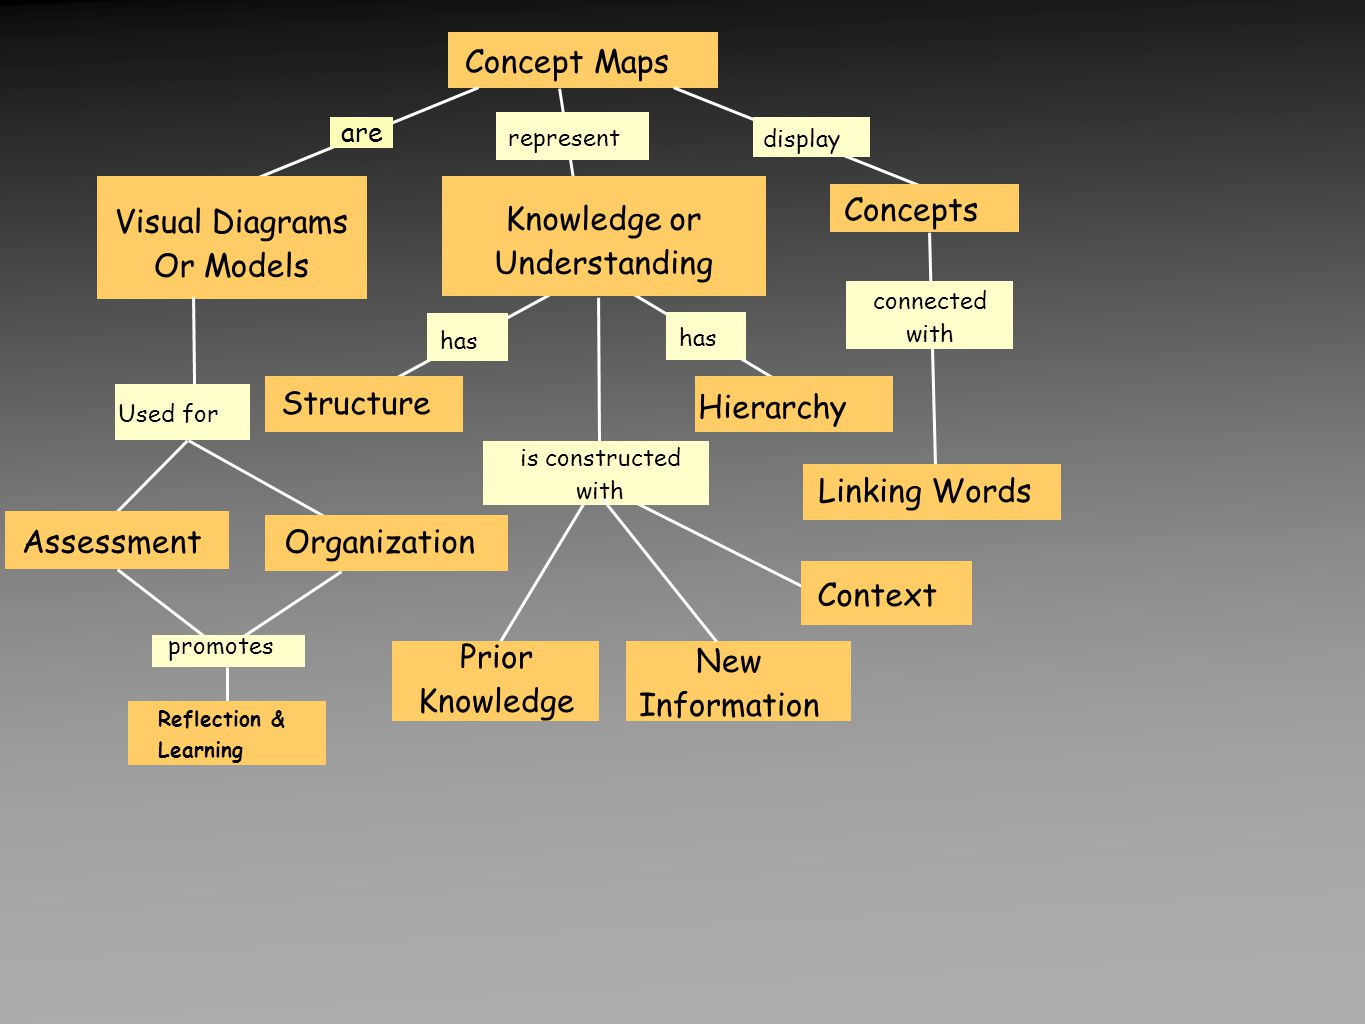 Hierarchy has Structure has Concept Maps Visual Diagrams Or Models are represent Knowledge or Understanding Concepts display connected with Linking Words Used for AssessmentOrganization Reflection & Learning promotes Context is constructed with New Information Prior Knowledge